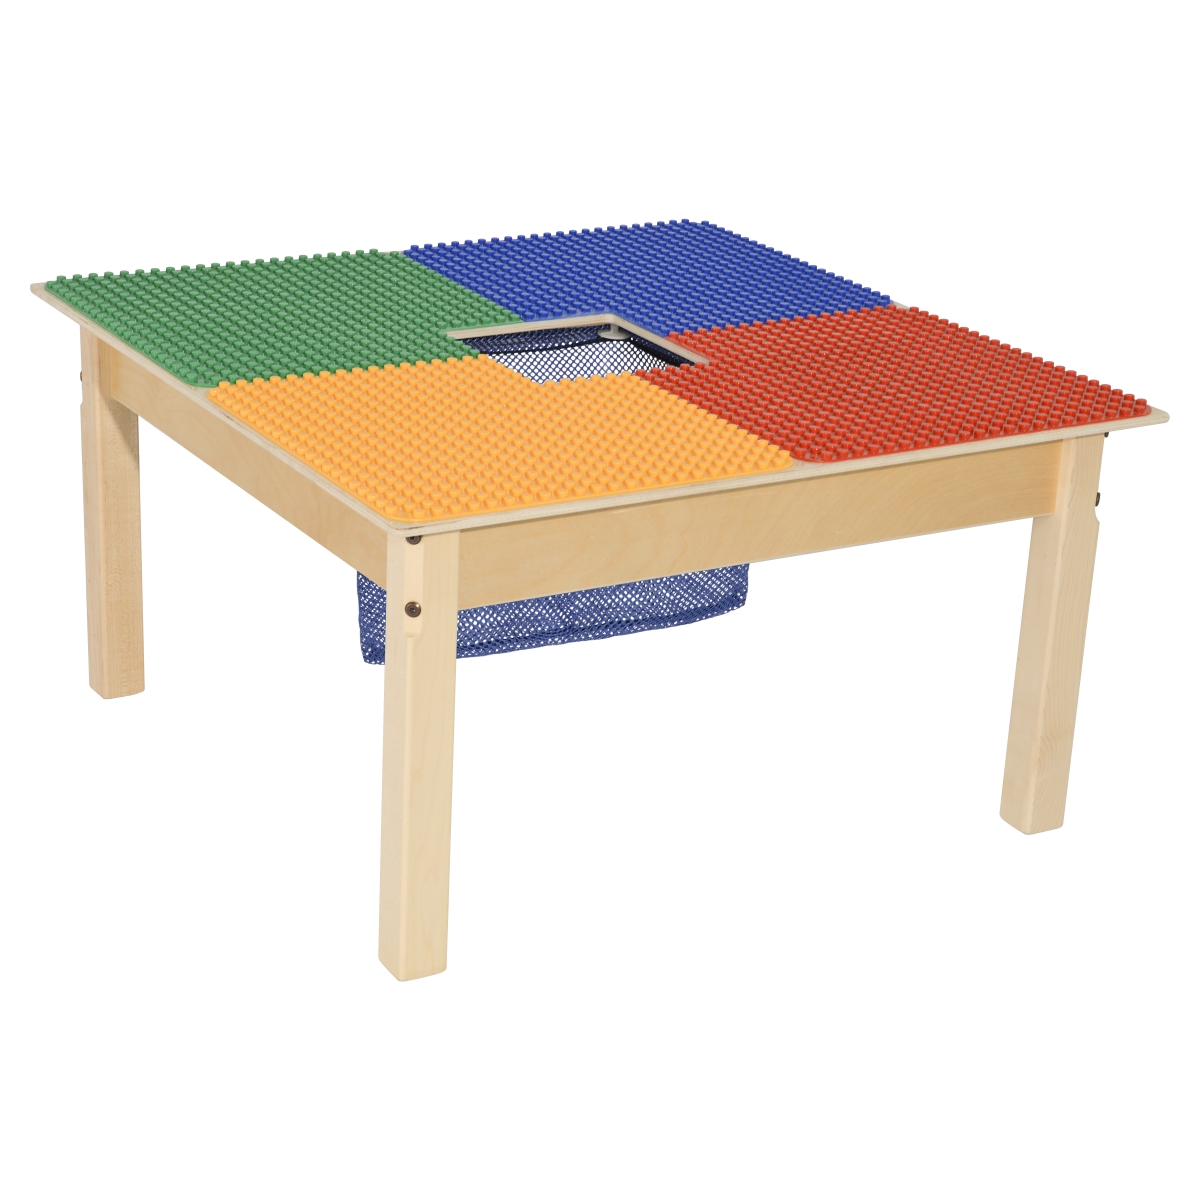 Tp3131pgn16 16 In. Duplo Compatible Square Table With Legs, Multi Color